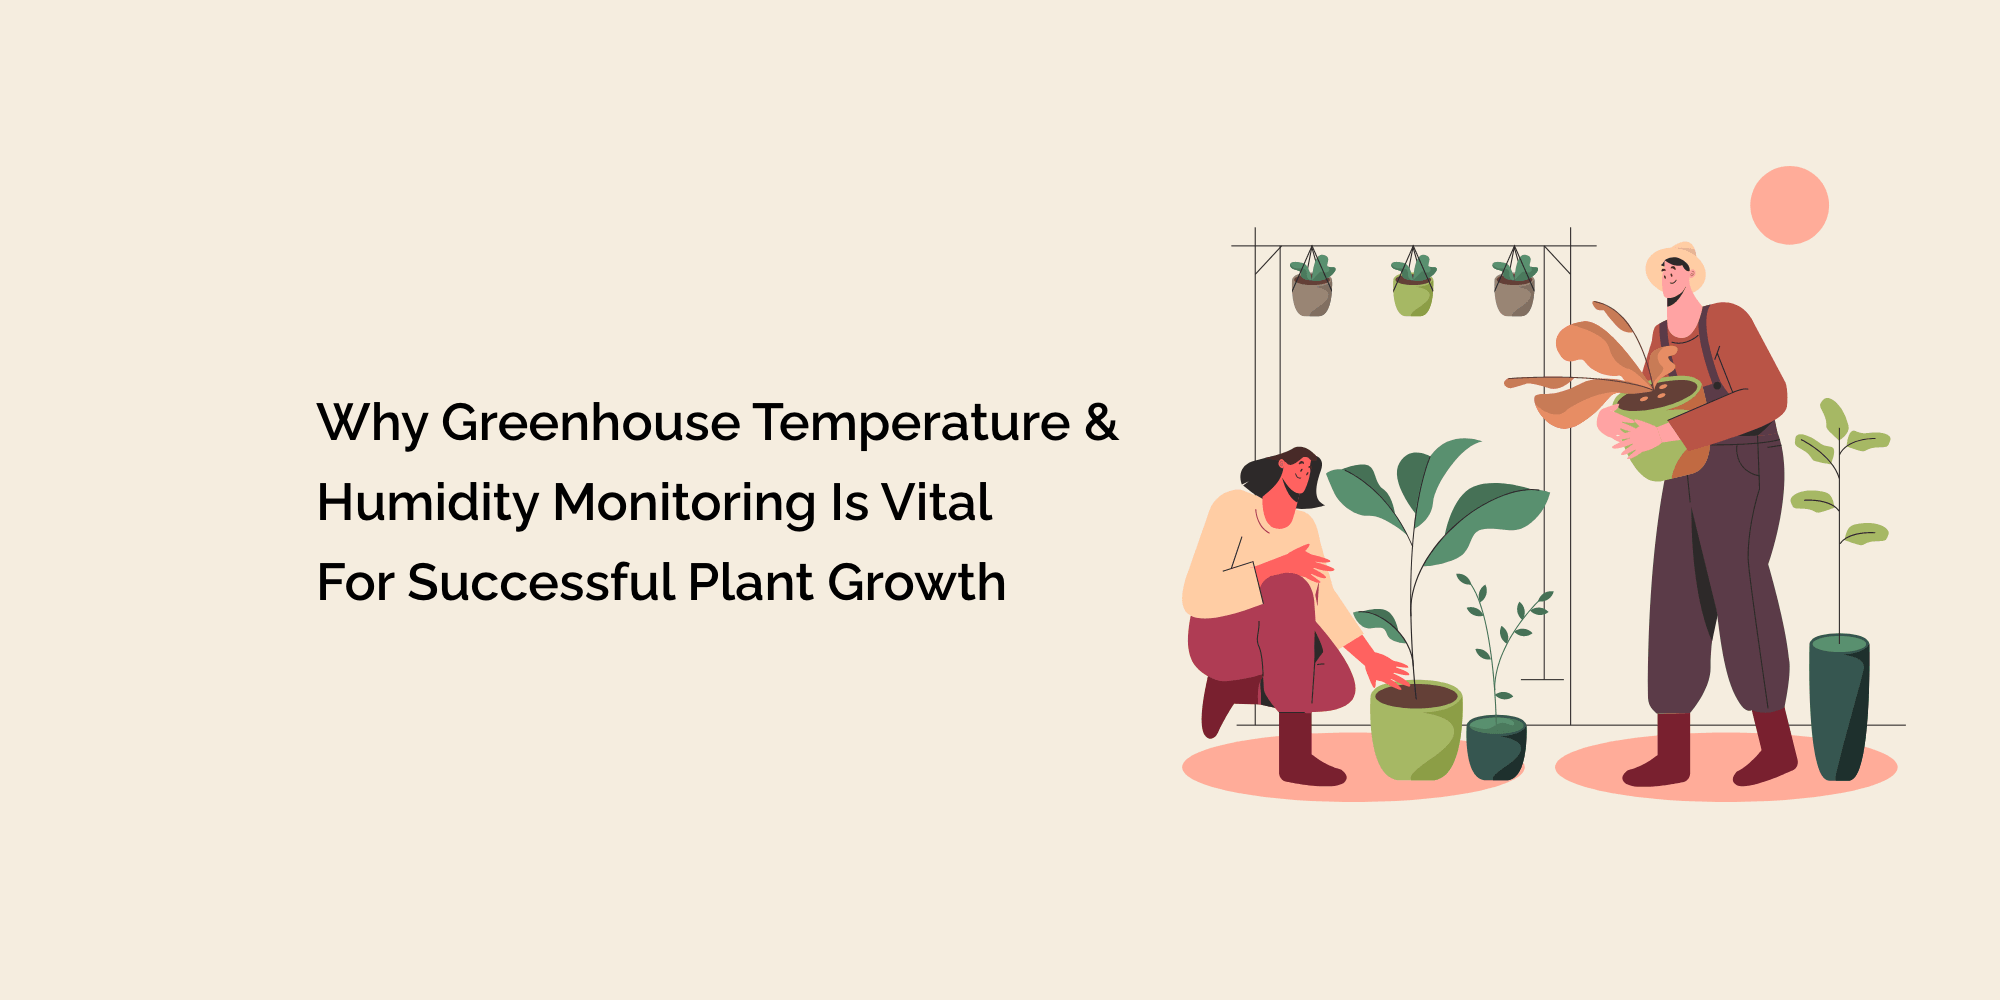 Why Greenhouse Temperature & Humidity Monitoring is Vital for Successful Plant Growth